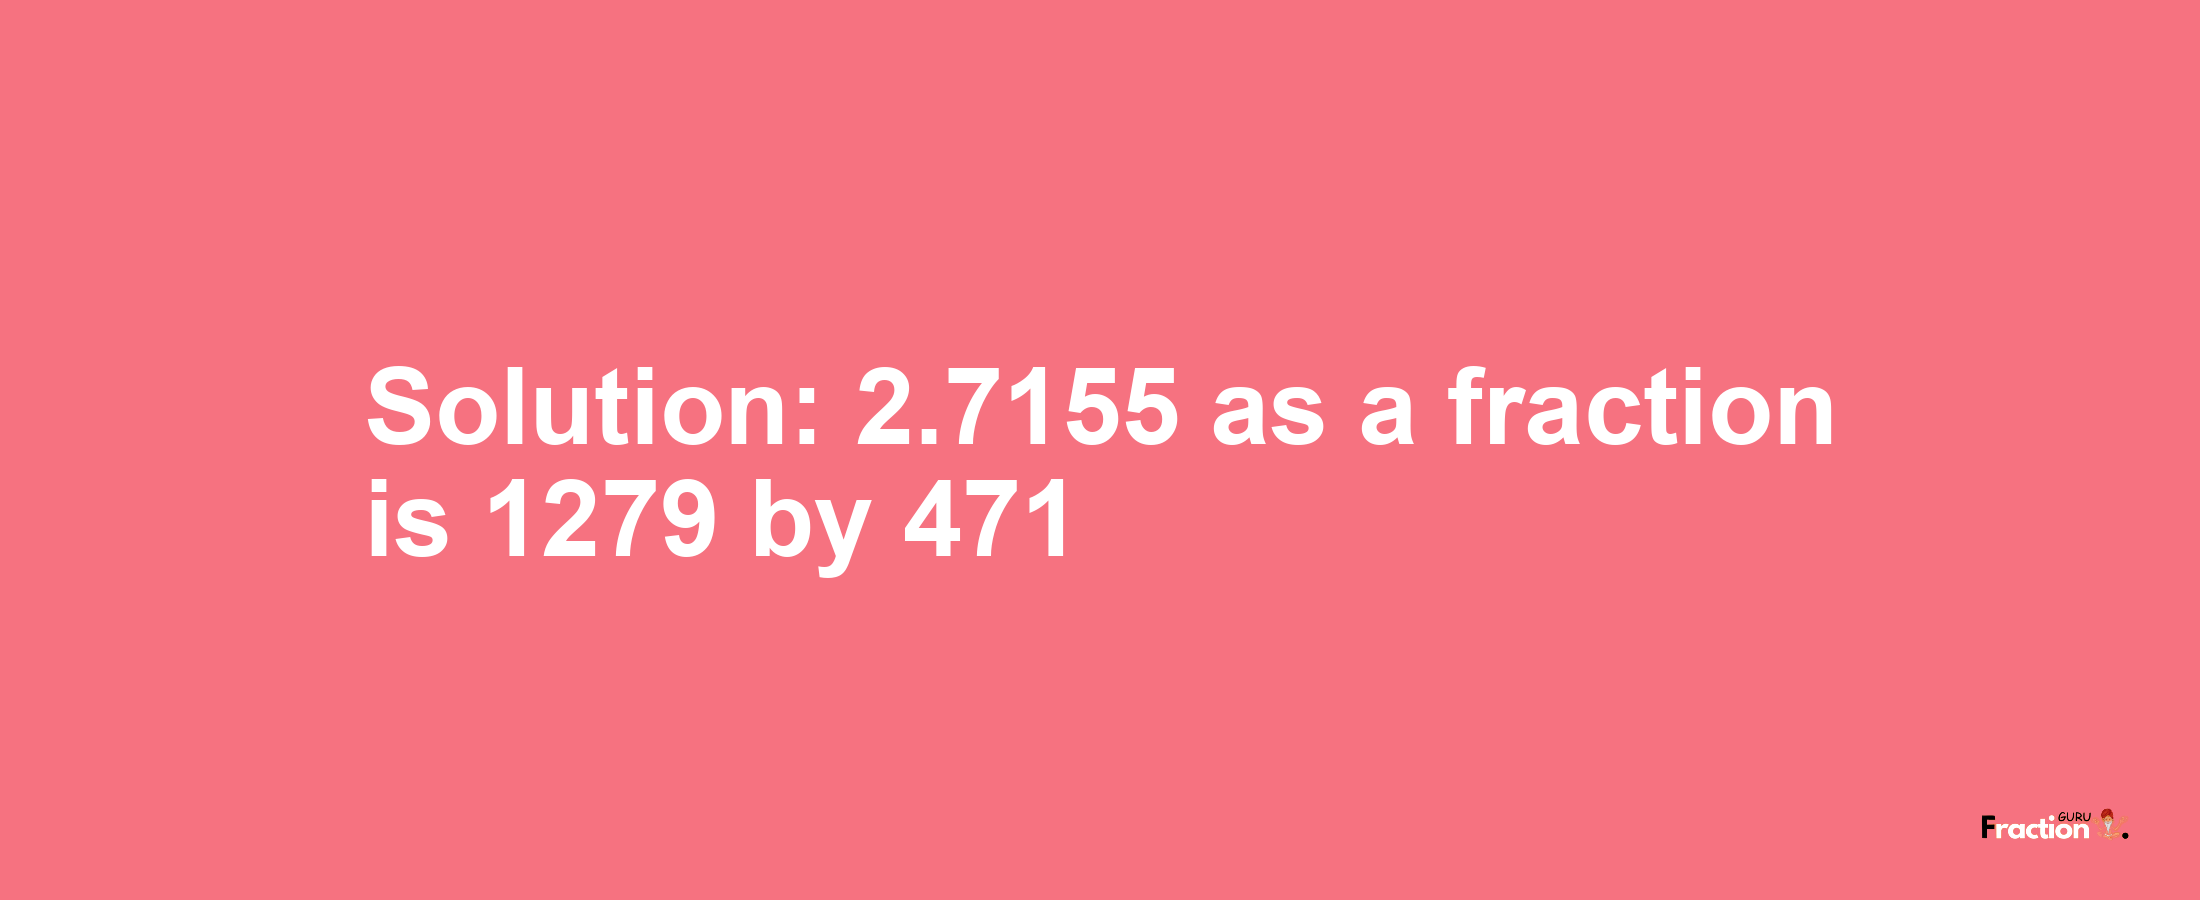 Solution:2.7155 as a fraction is 1279/471